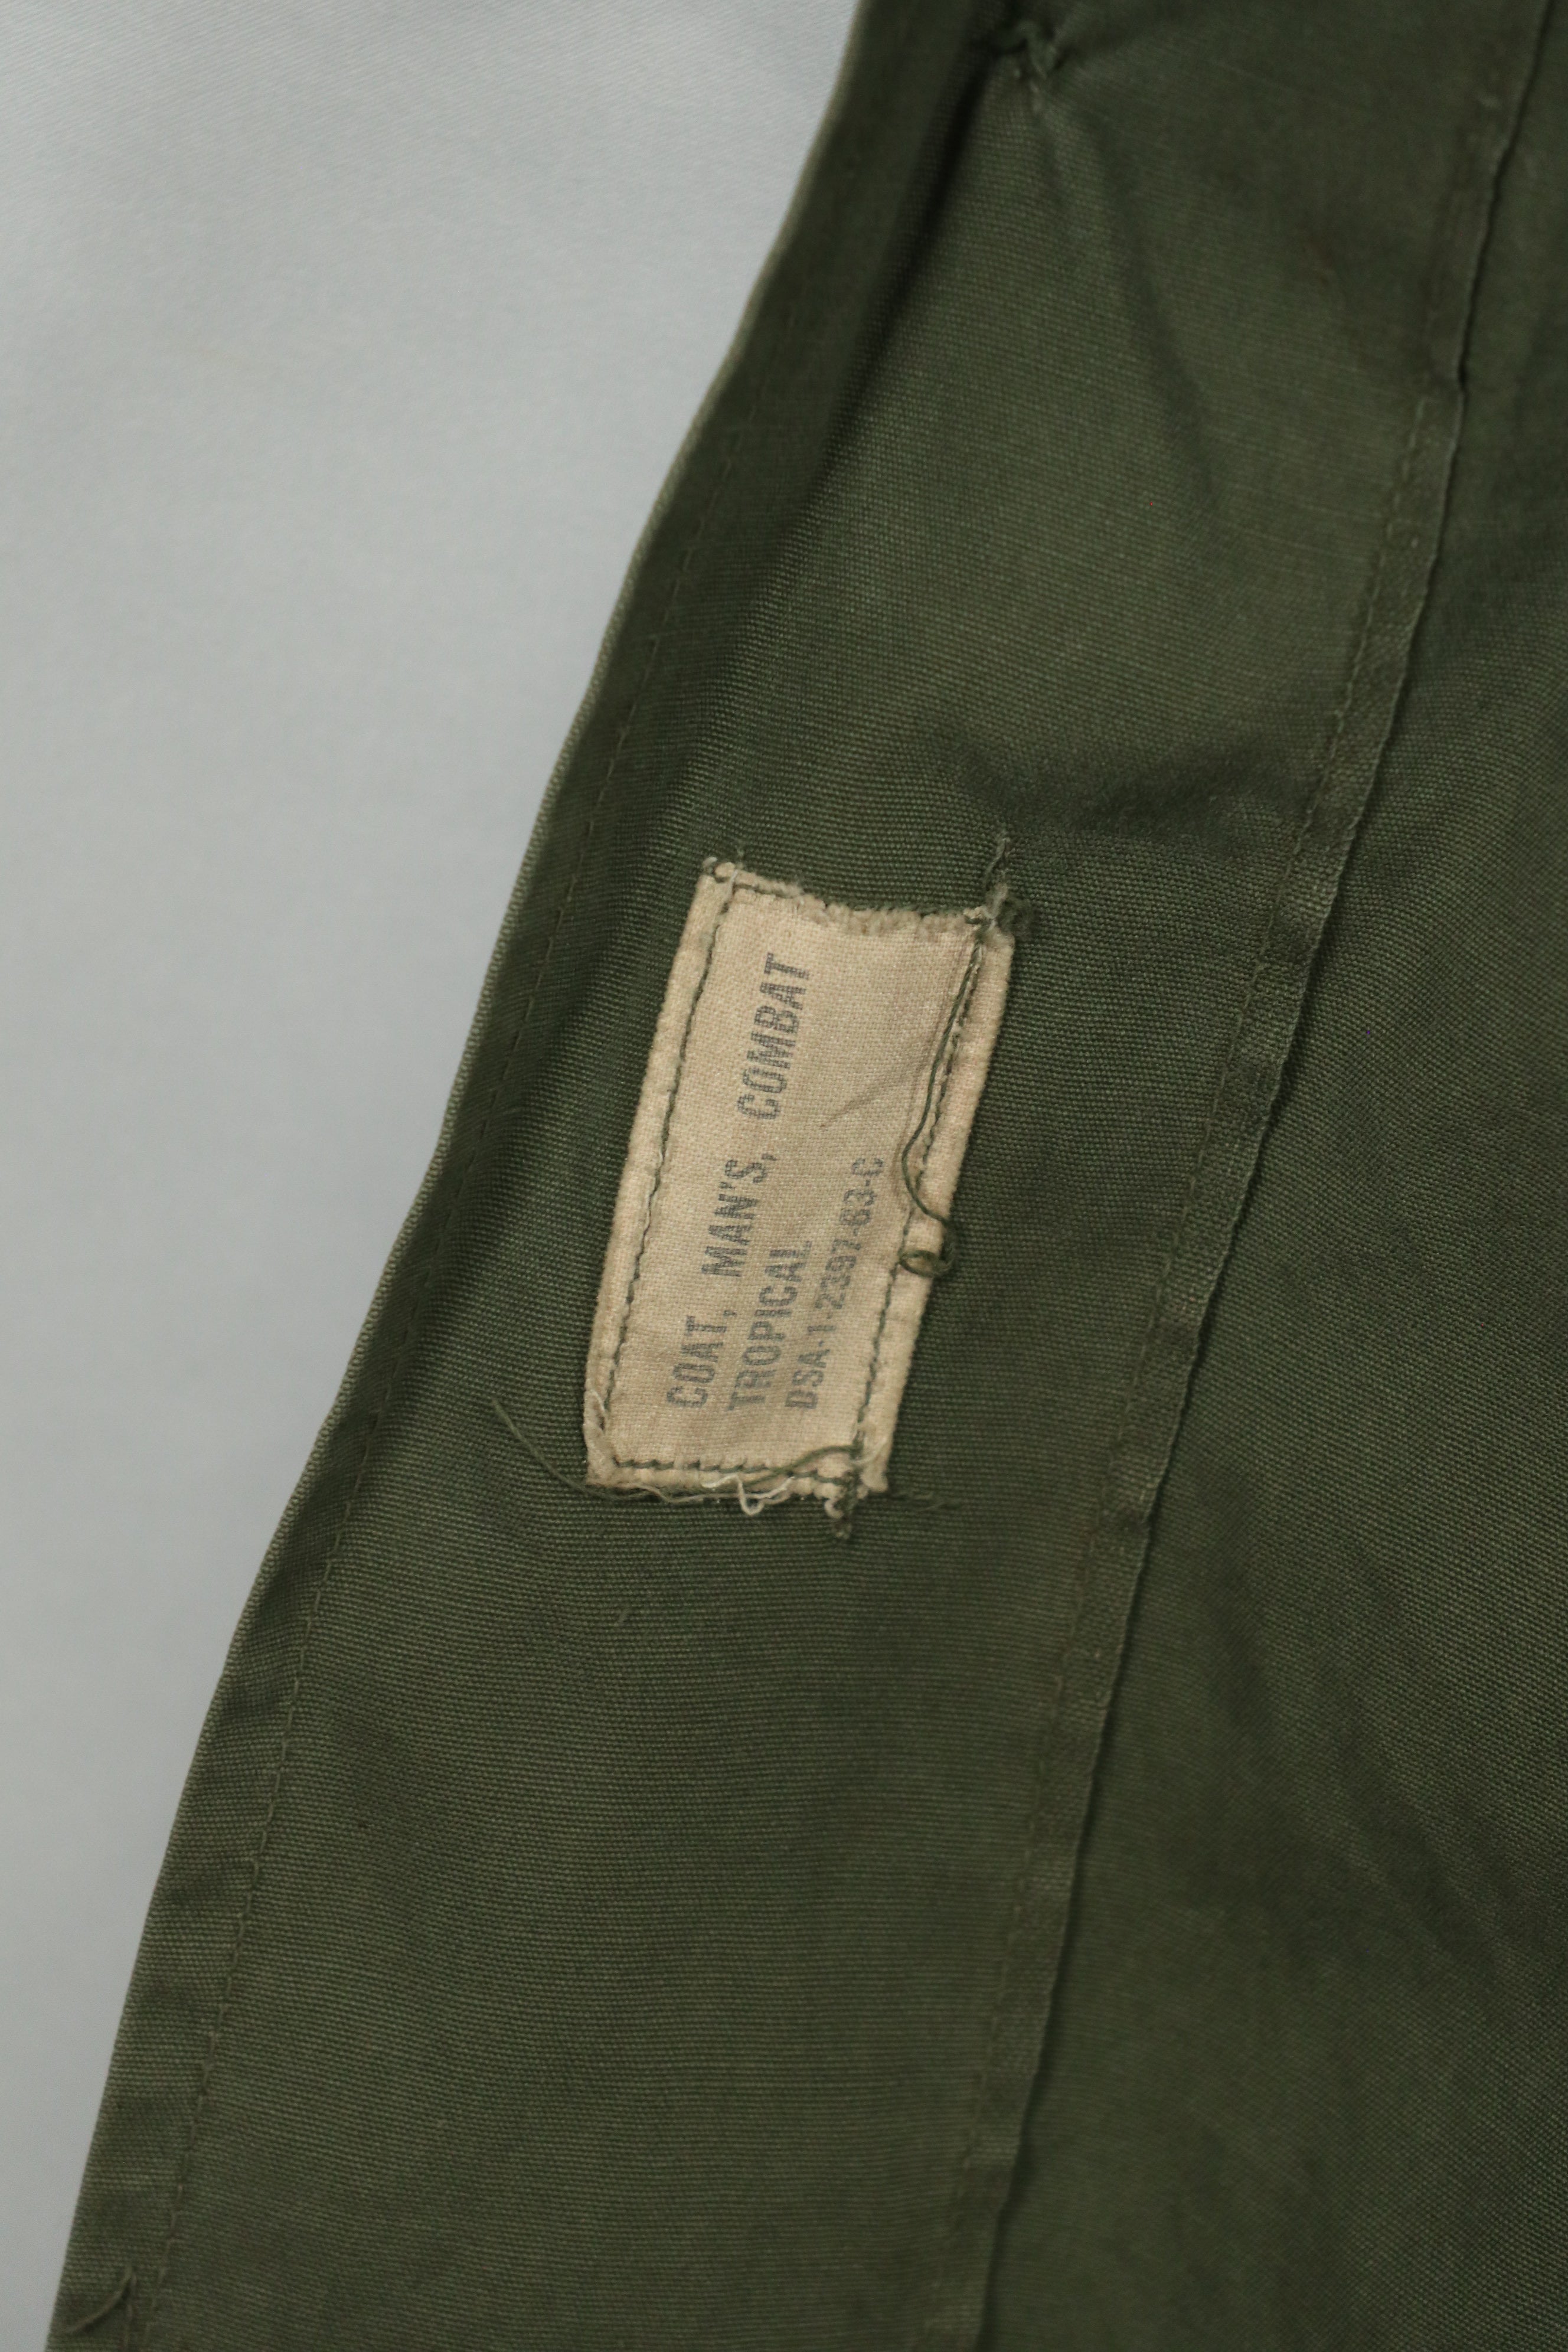 Real 1963 1st Model Jungle Fatigue Jacket MEDIUM-LONG, used with fading.